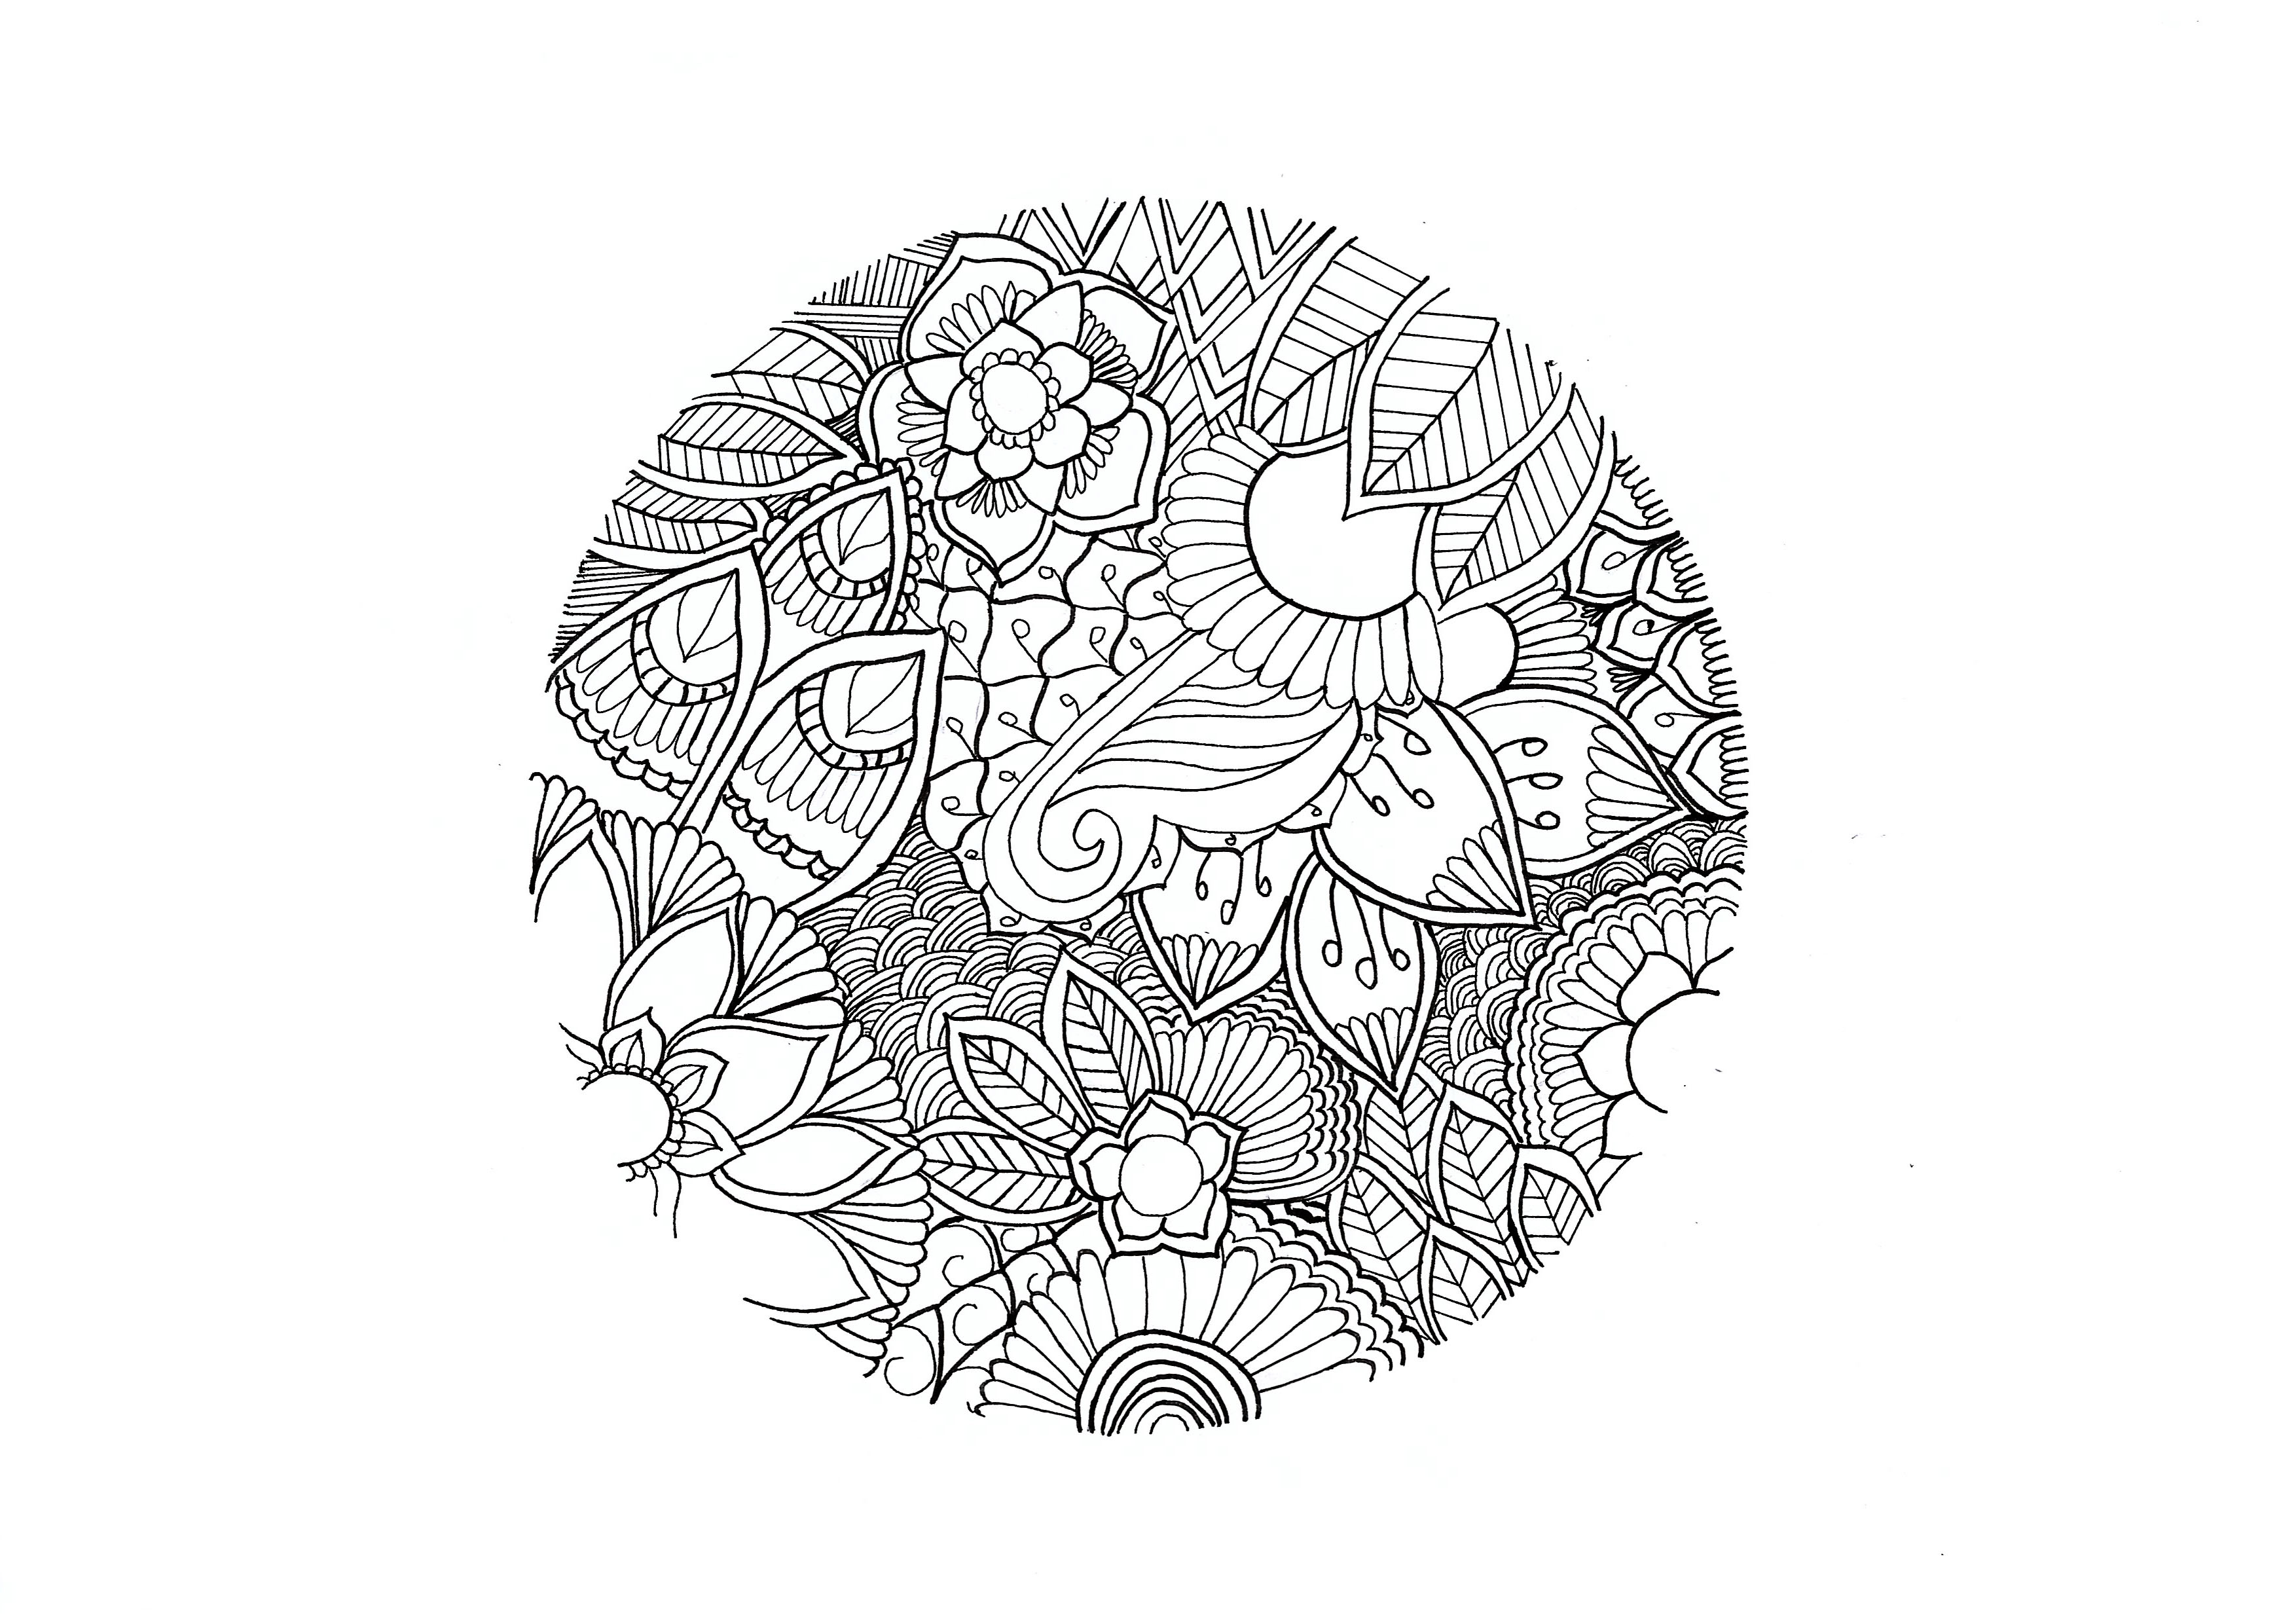 Mandala cercle for chloe - M&alas Adult Coloring Pages